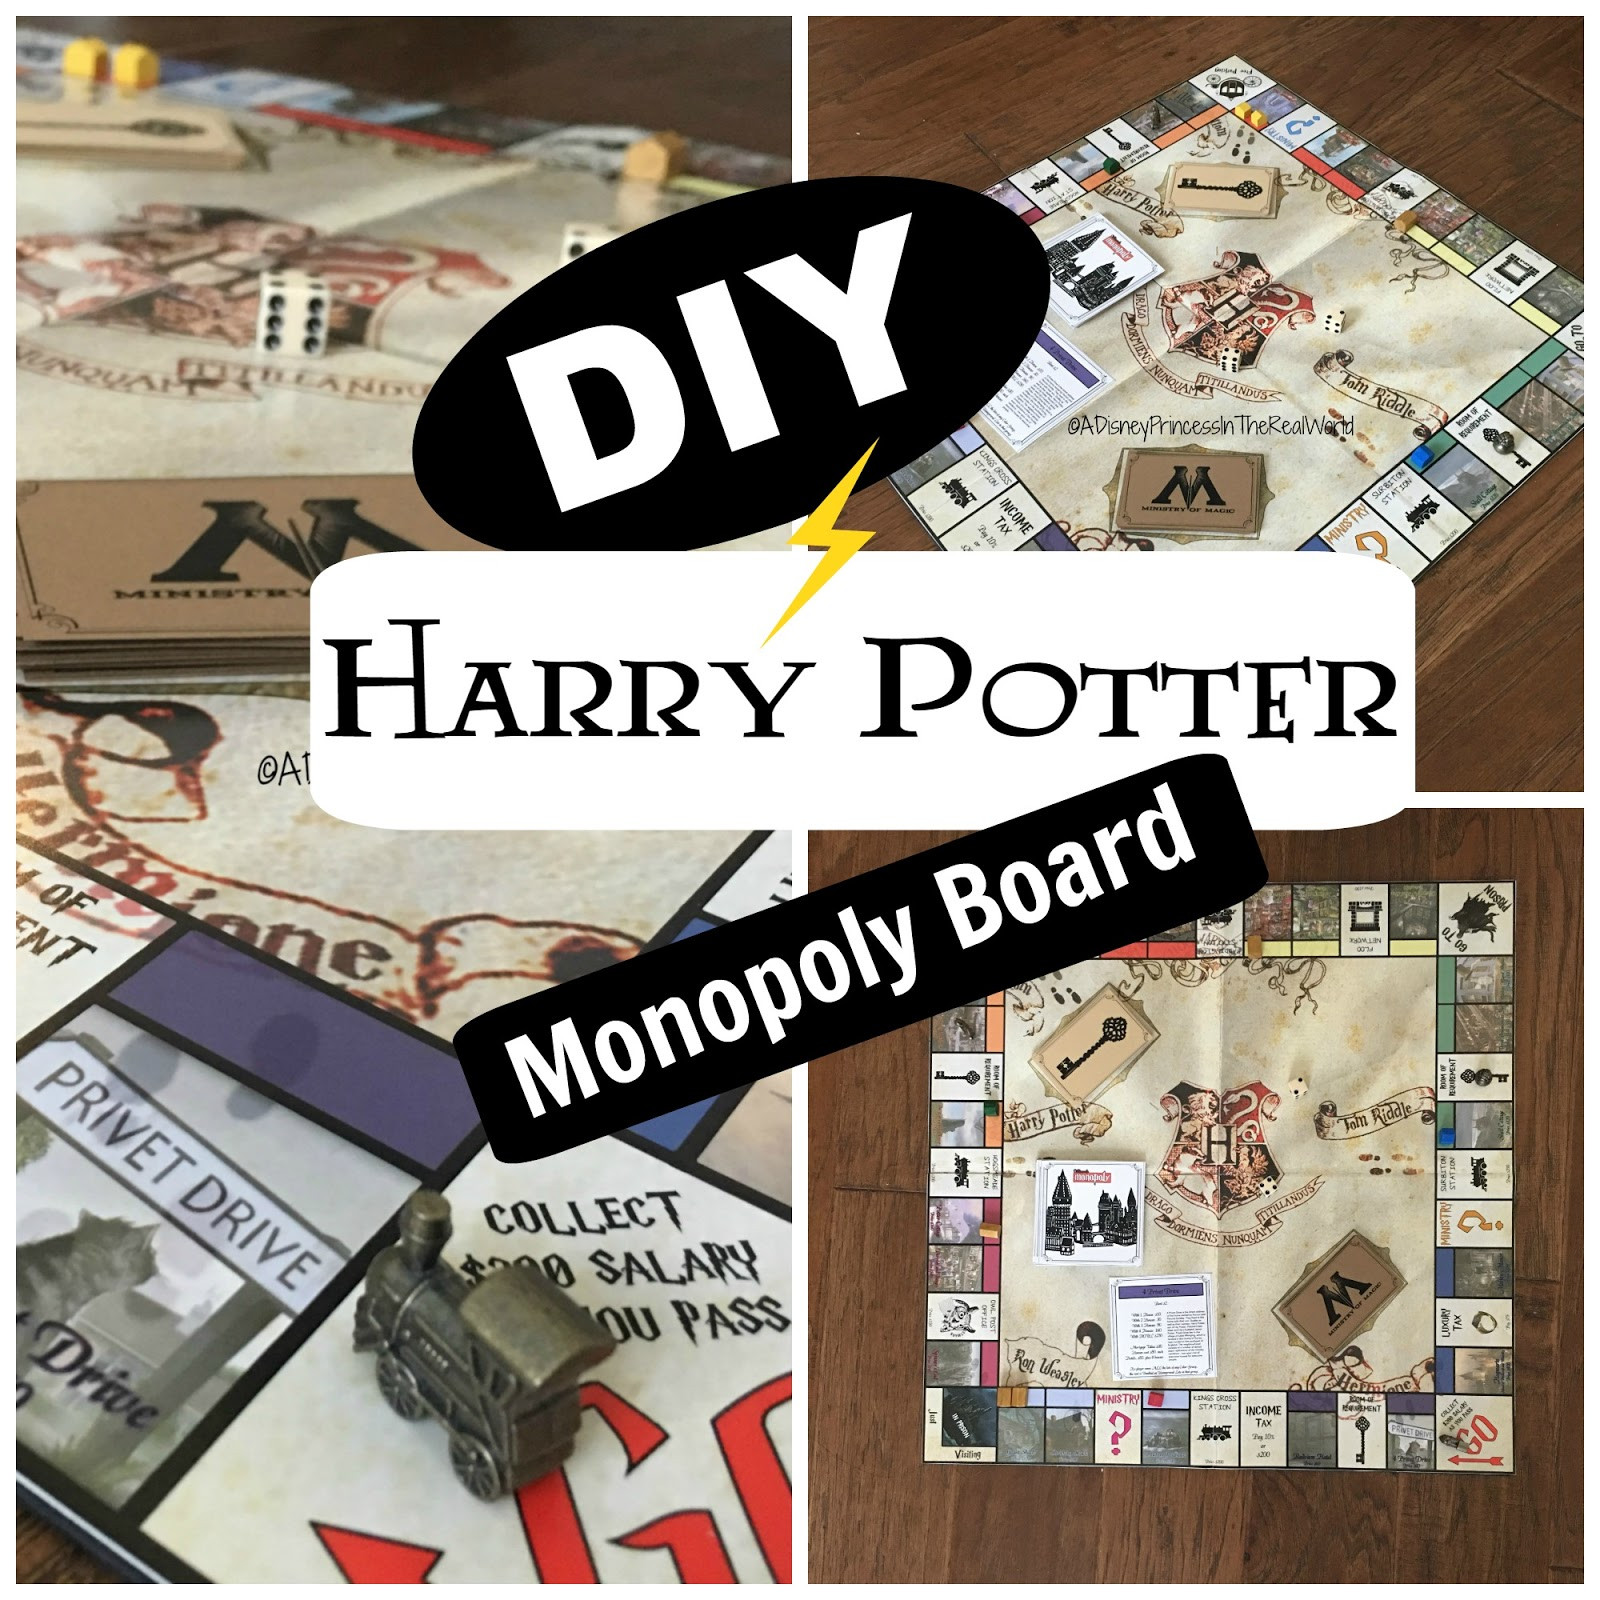 Harry Potter Monopoly Diy
 A Disney Princess in the real world DIY Harry Potter